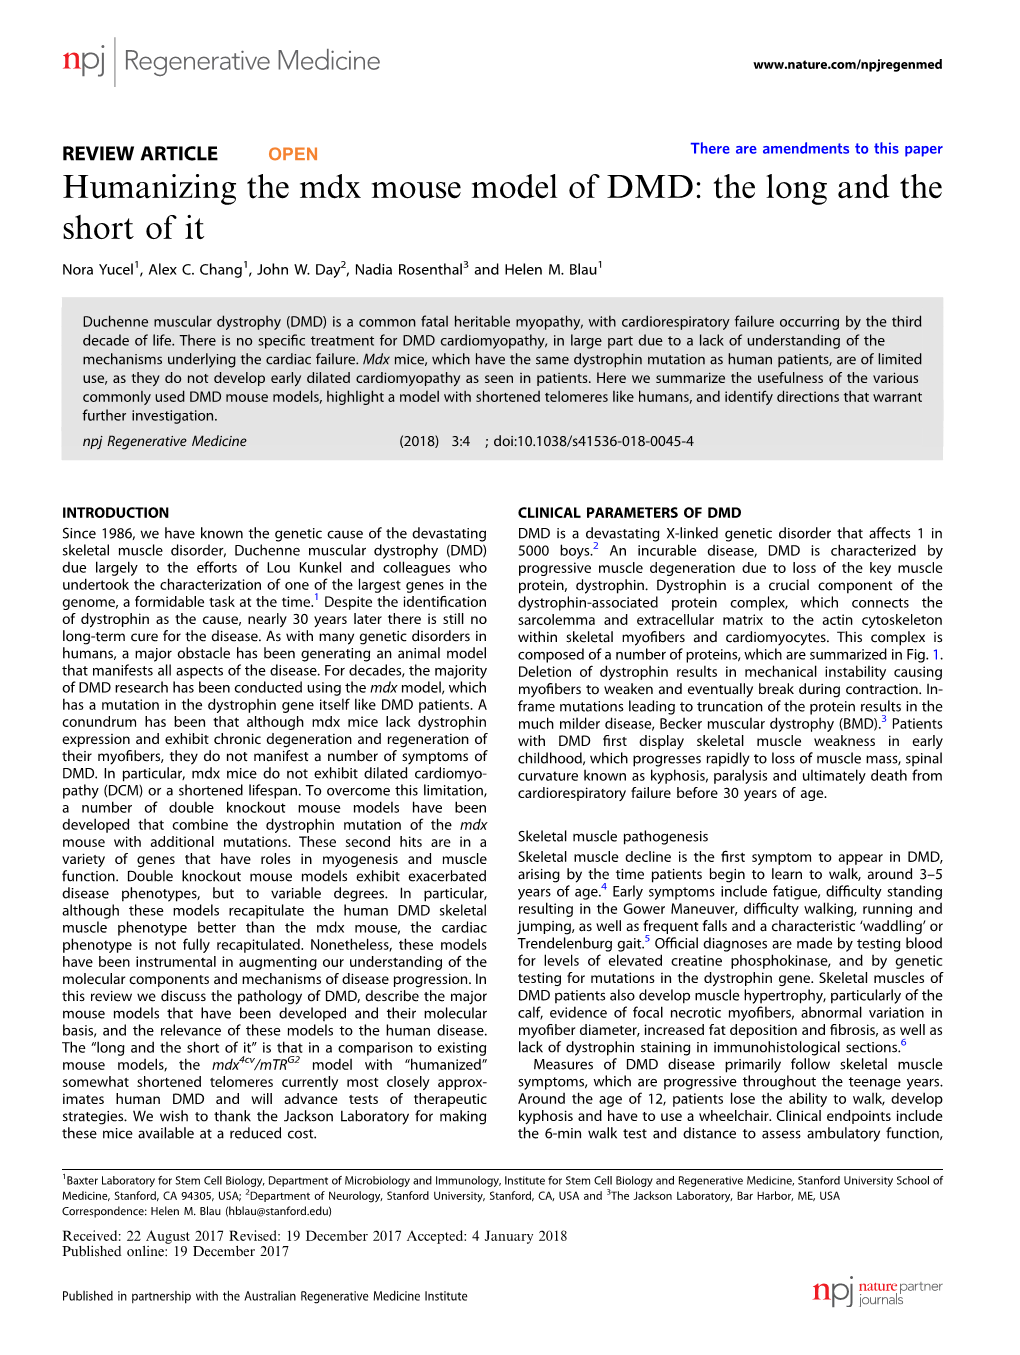 Humanizing the Mdx Mouse Model of DMD: the Long and the Short of It